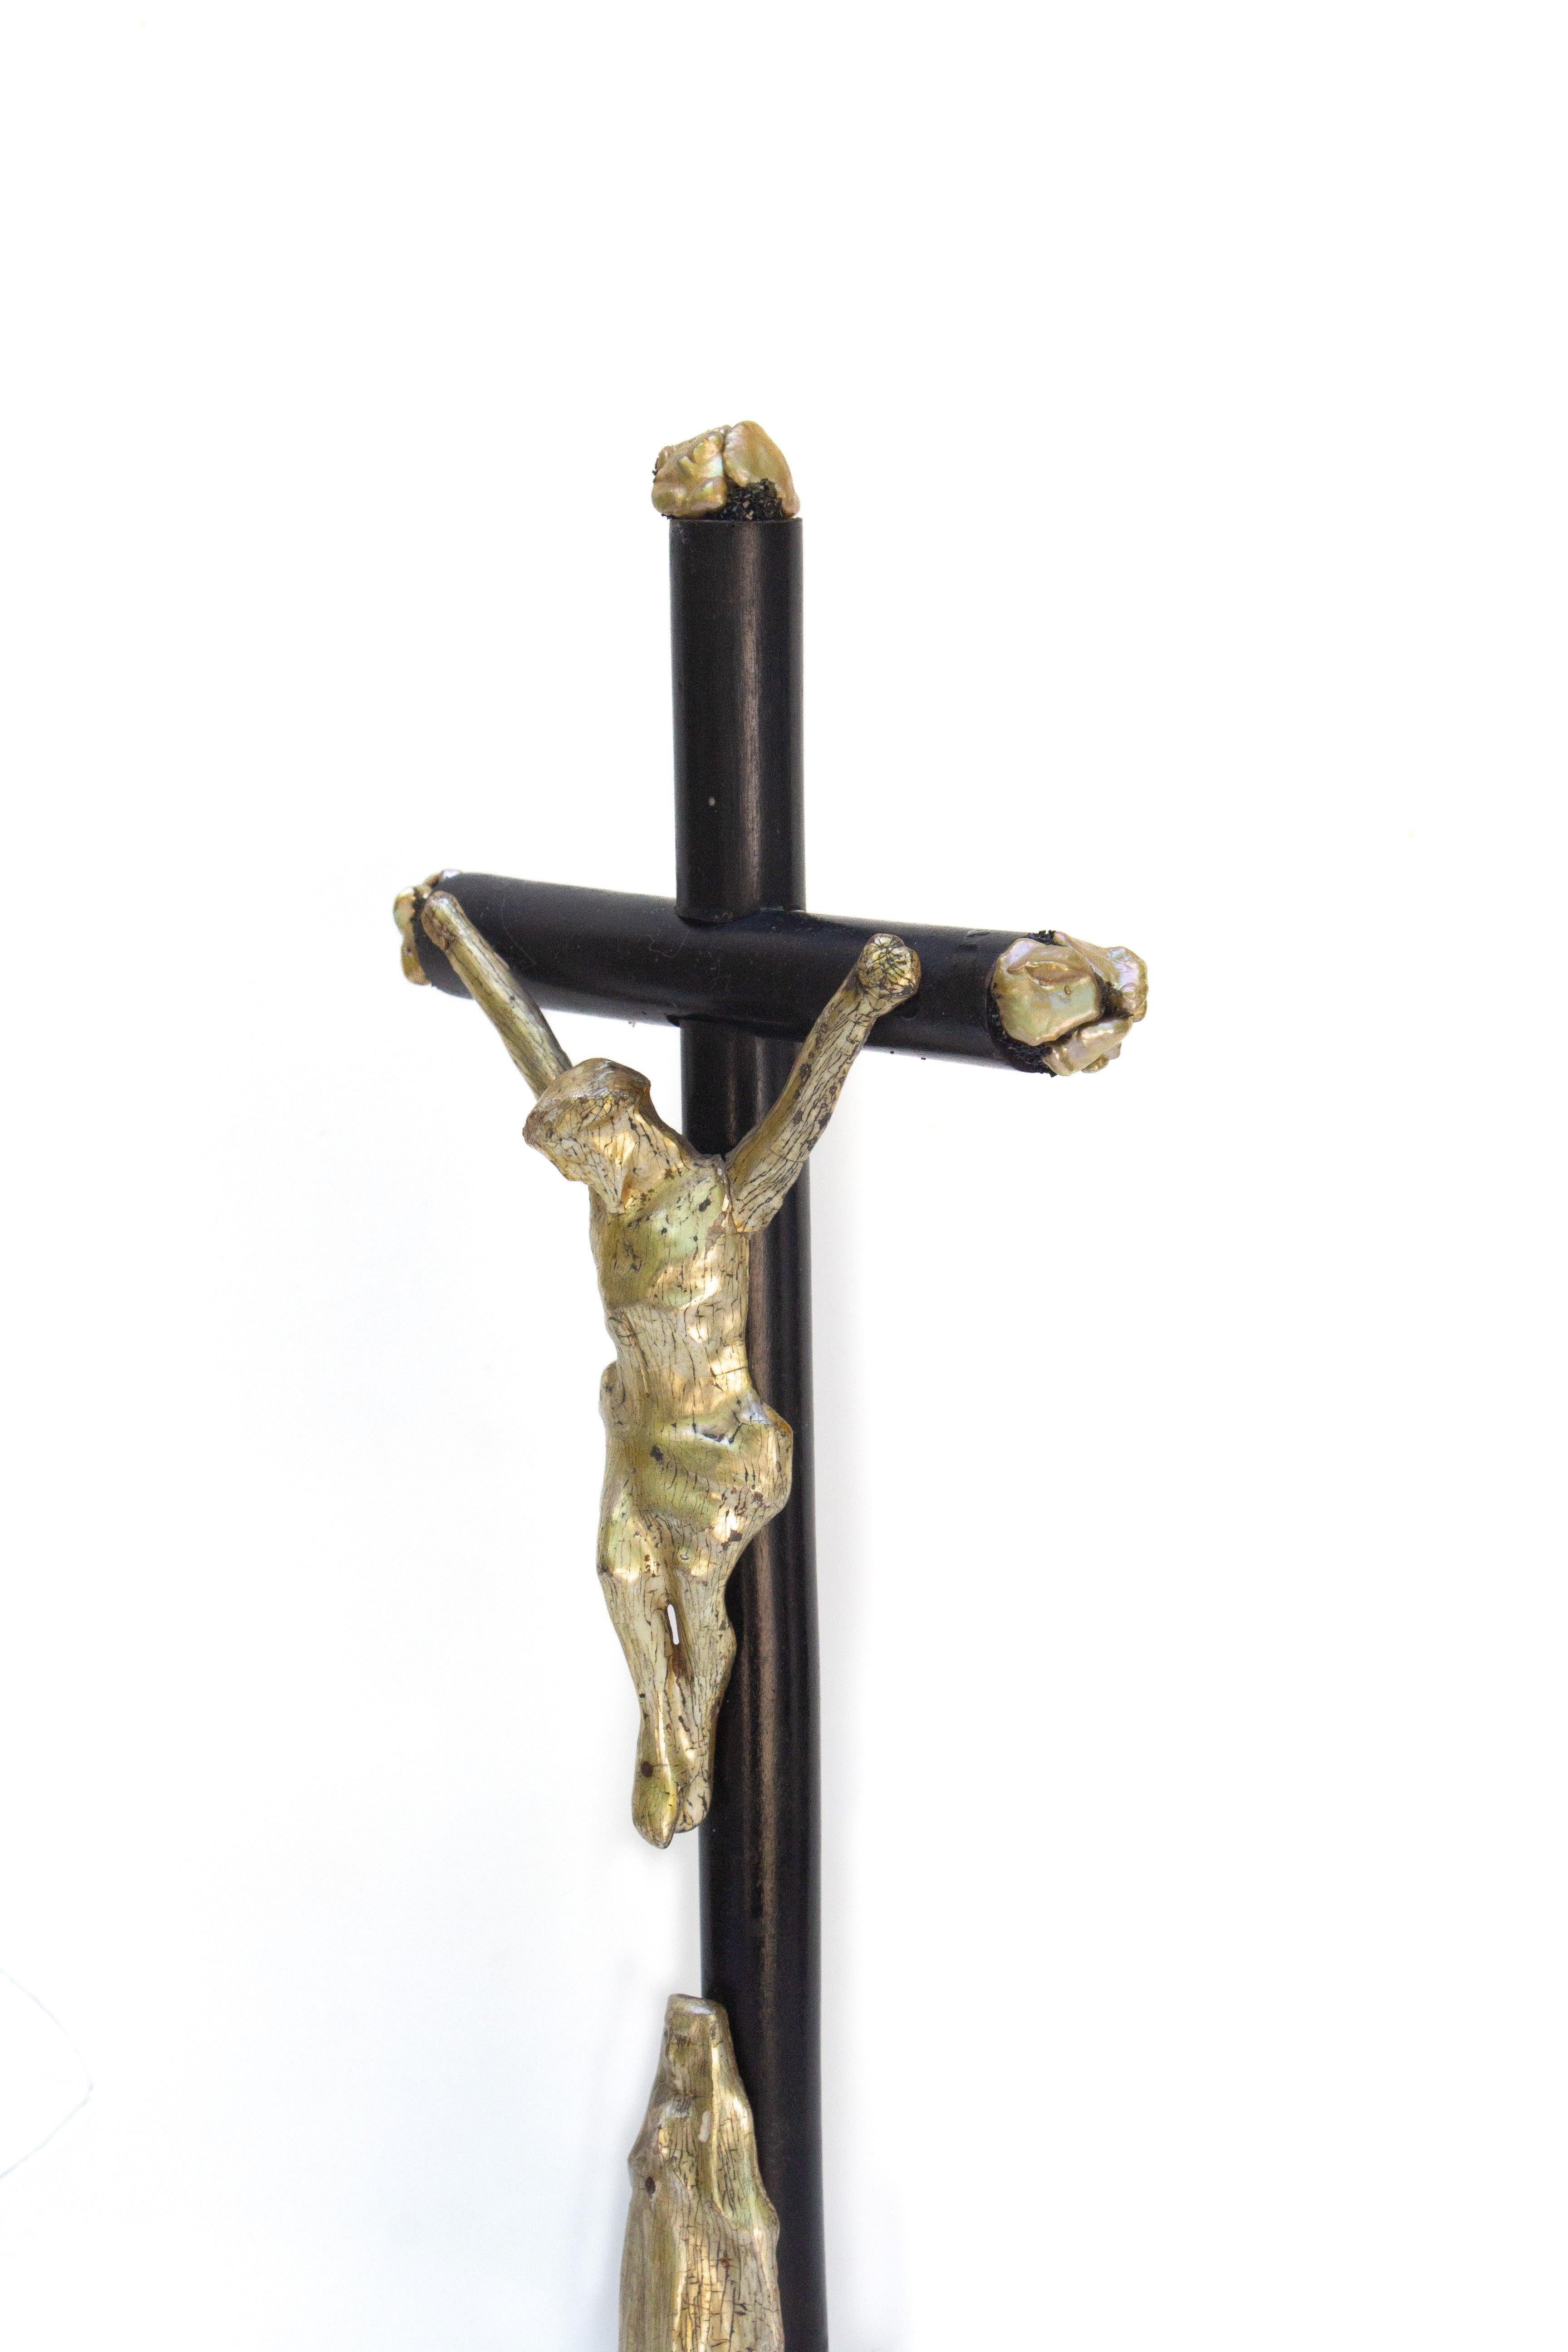 Carved 19th Century Italian Black Crucifix with a Pearlescent Gold Figure of Christ